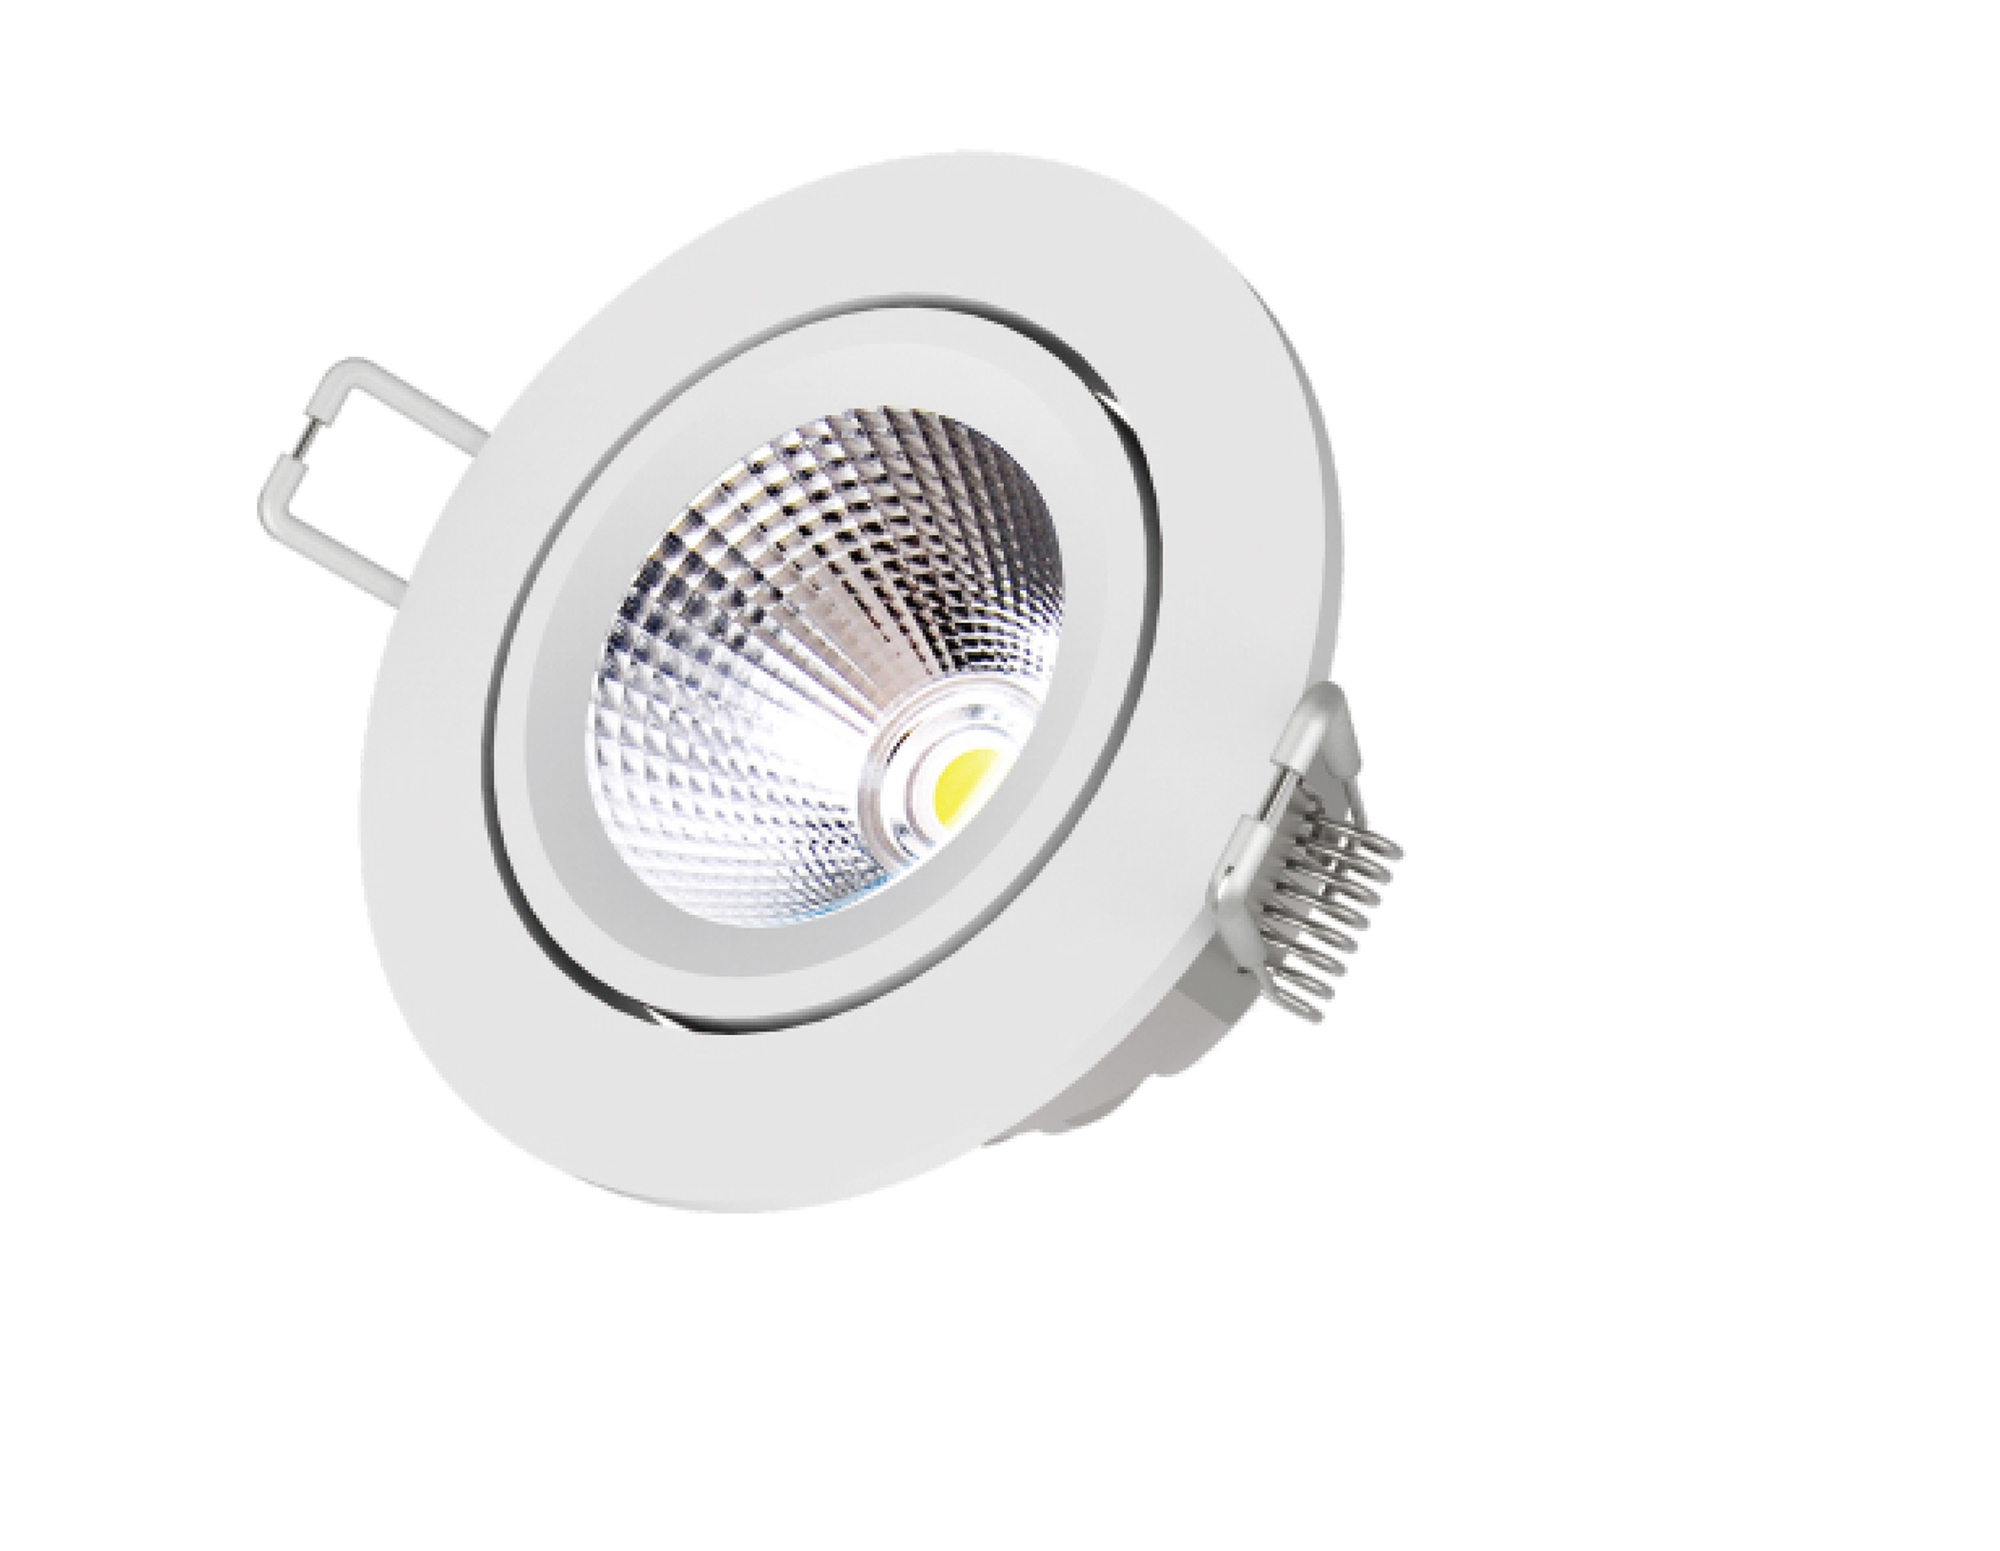 SD-04R-Y  Smart Spot light; RF 2.4GHz; 4W; Dimmable; 3000K; 24 degree beam angle; 200-240Vac; F75mm cut-out; IP20.